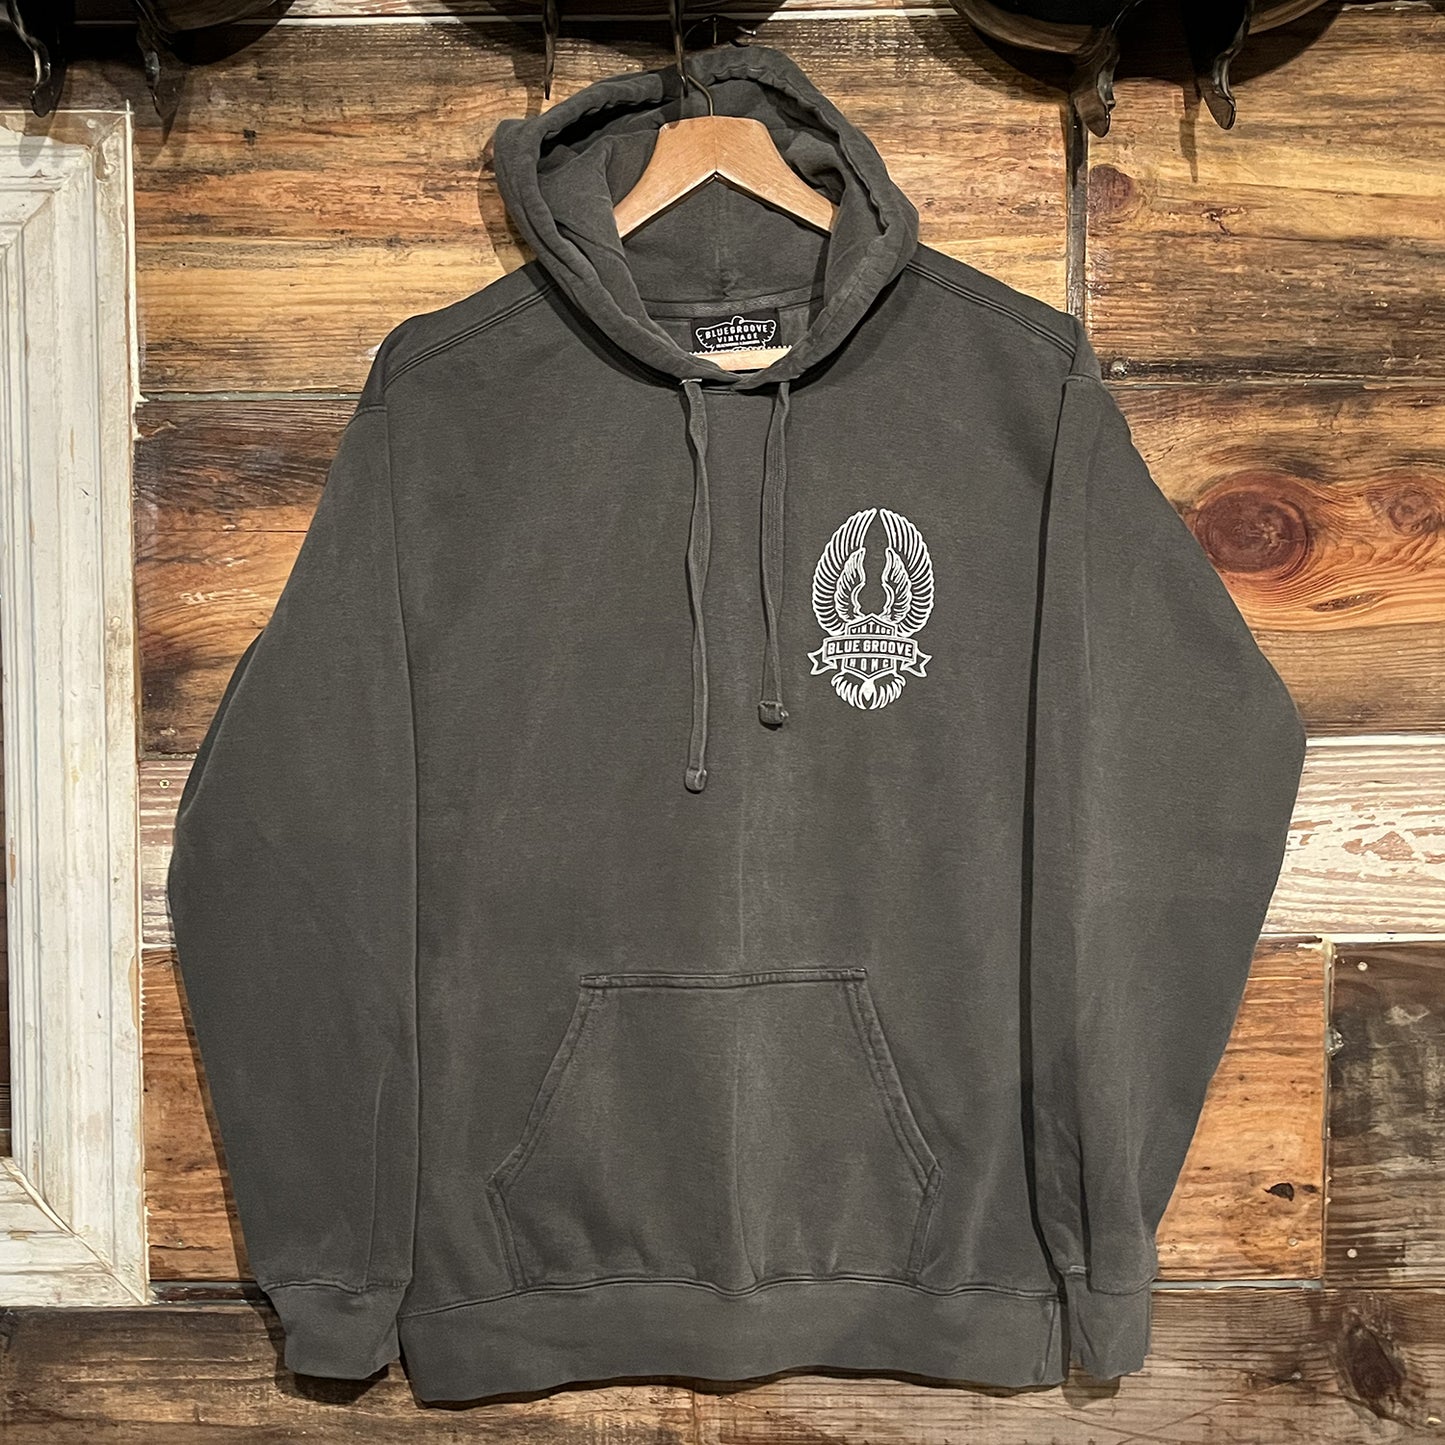 “BRING ‘EM BACK TO LIFE” PULL-OVER HOODIE - PEPPER